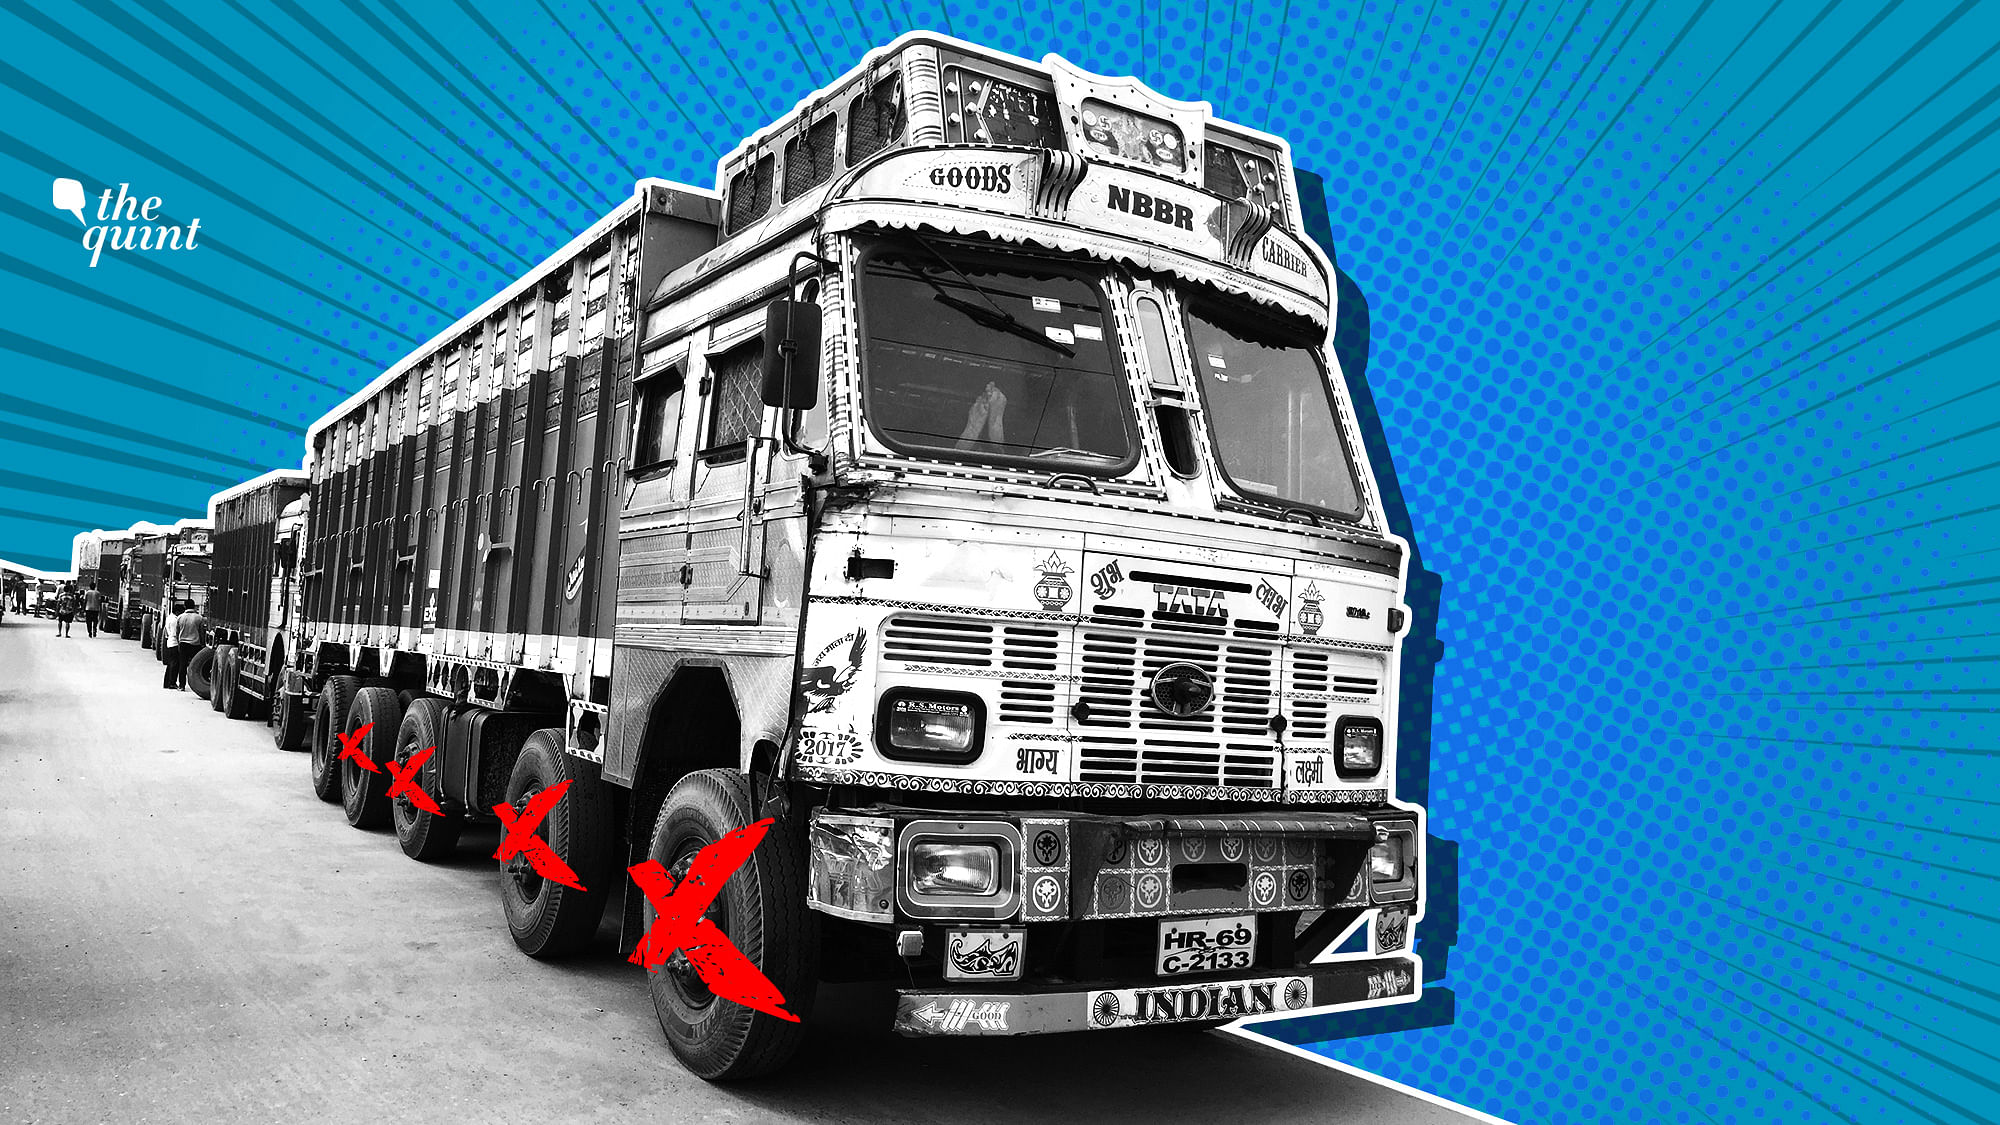 Why is Delhi-NCR Facing ‘Chakka Jam’ by Commercial Vehicle Owners?